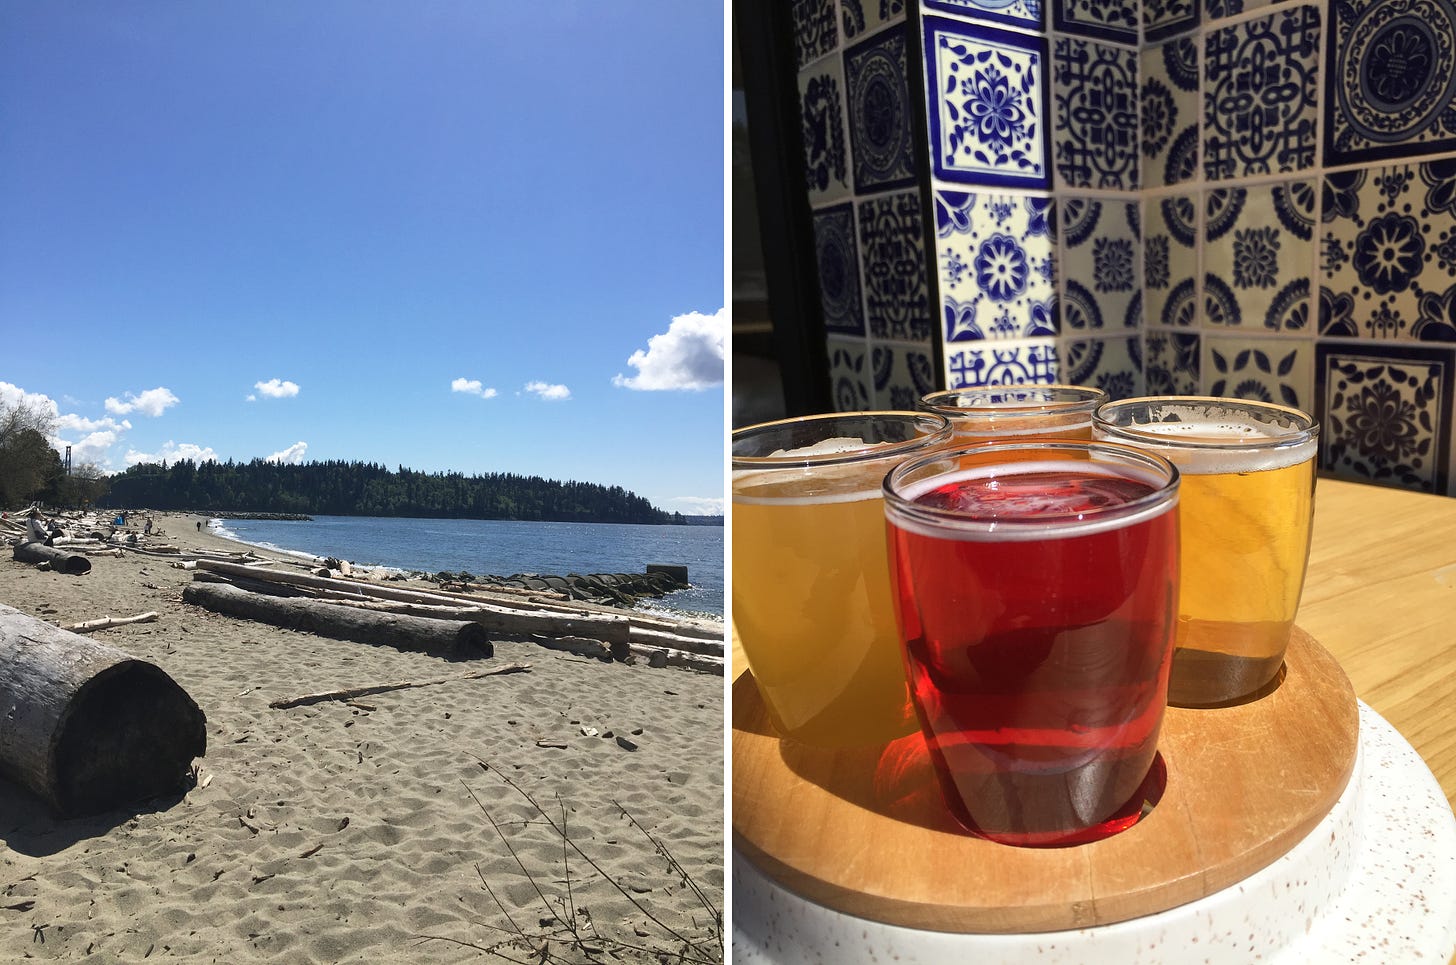 left image: a beach on a bright sunny day with logs in the foreground, and on the horizon, a view of Stanley Park from afar. right image: a flight of four beers on a circular wooden board, with a wall of white and blue Mexican tiles in the background.